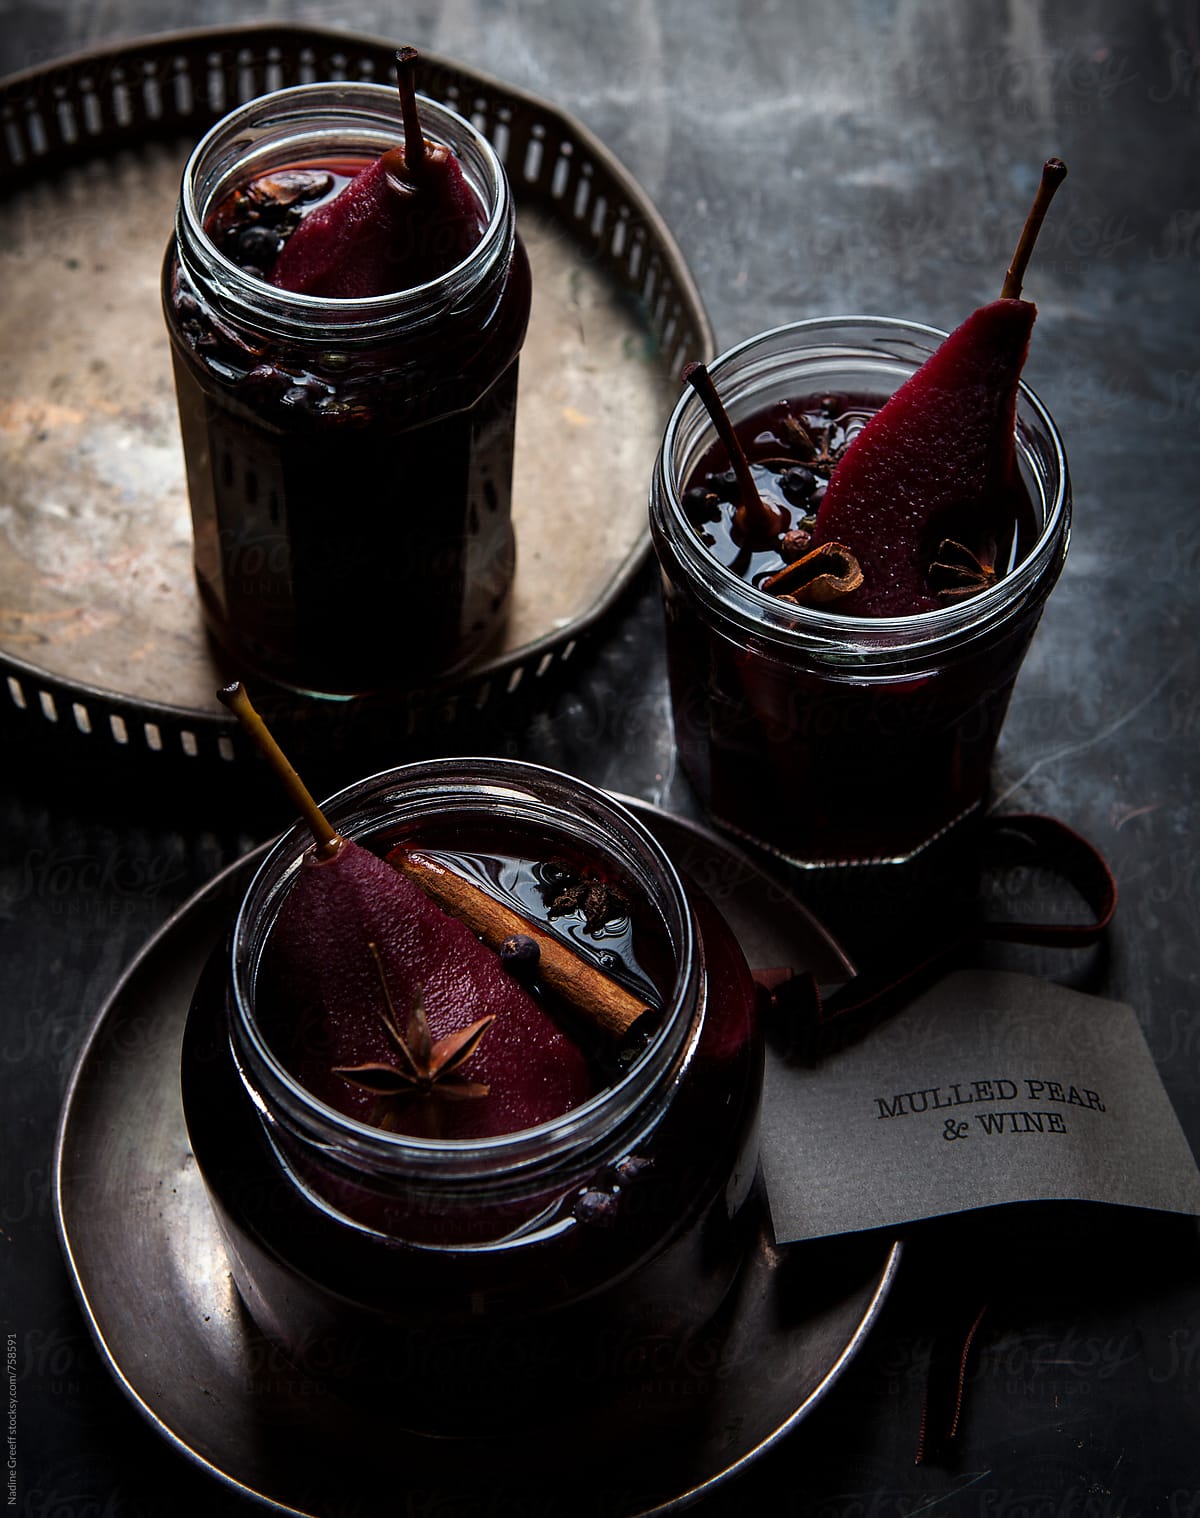 Poached pears in mulled red wine